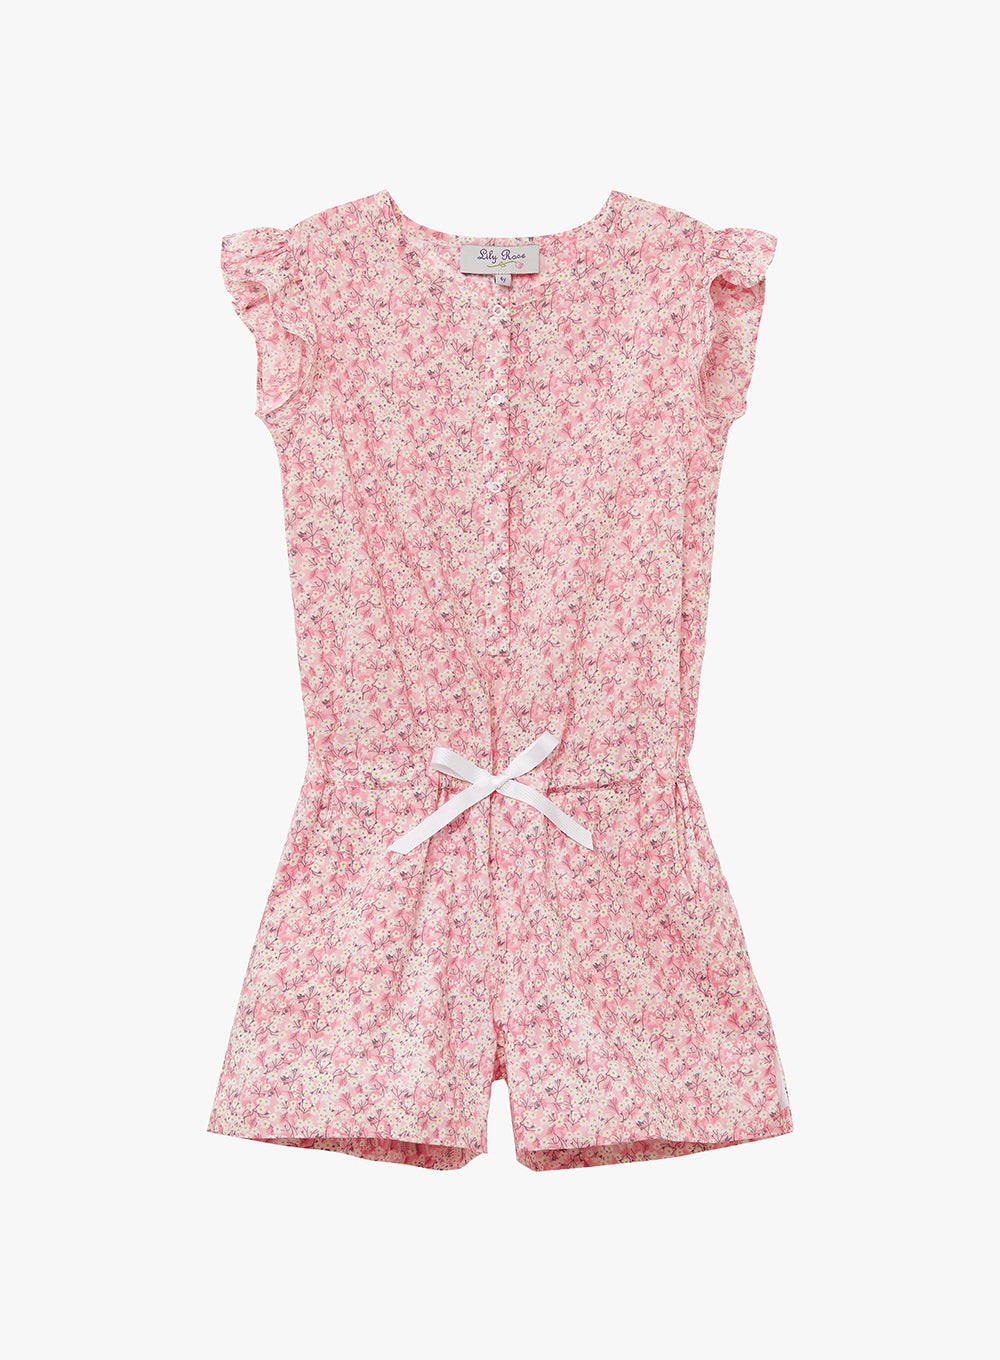 Lily Rose Playsuit Blossom Playsuit